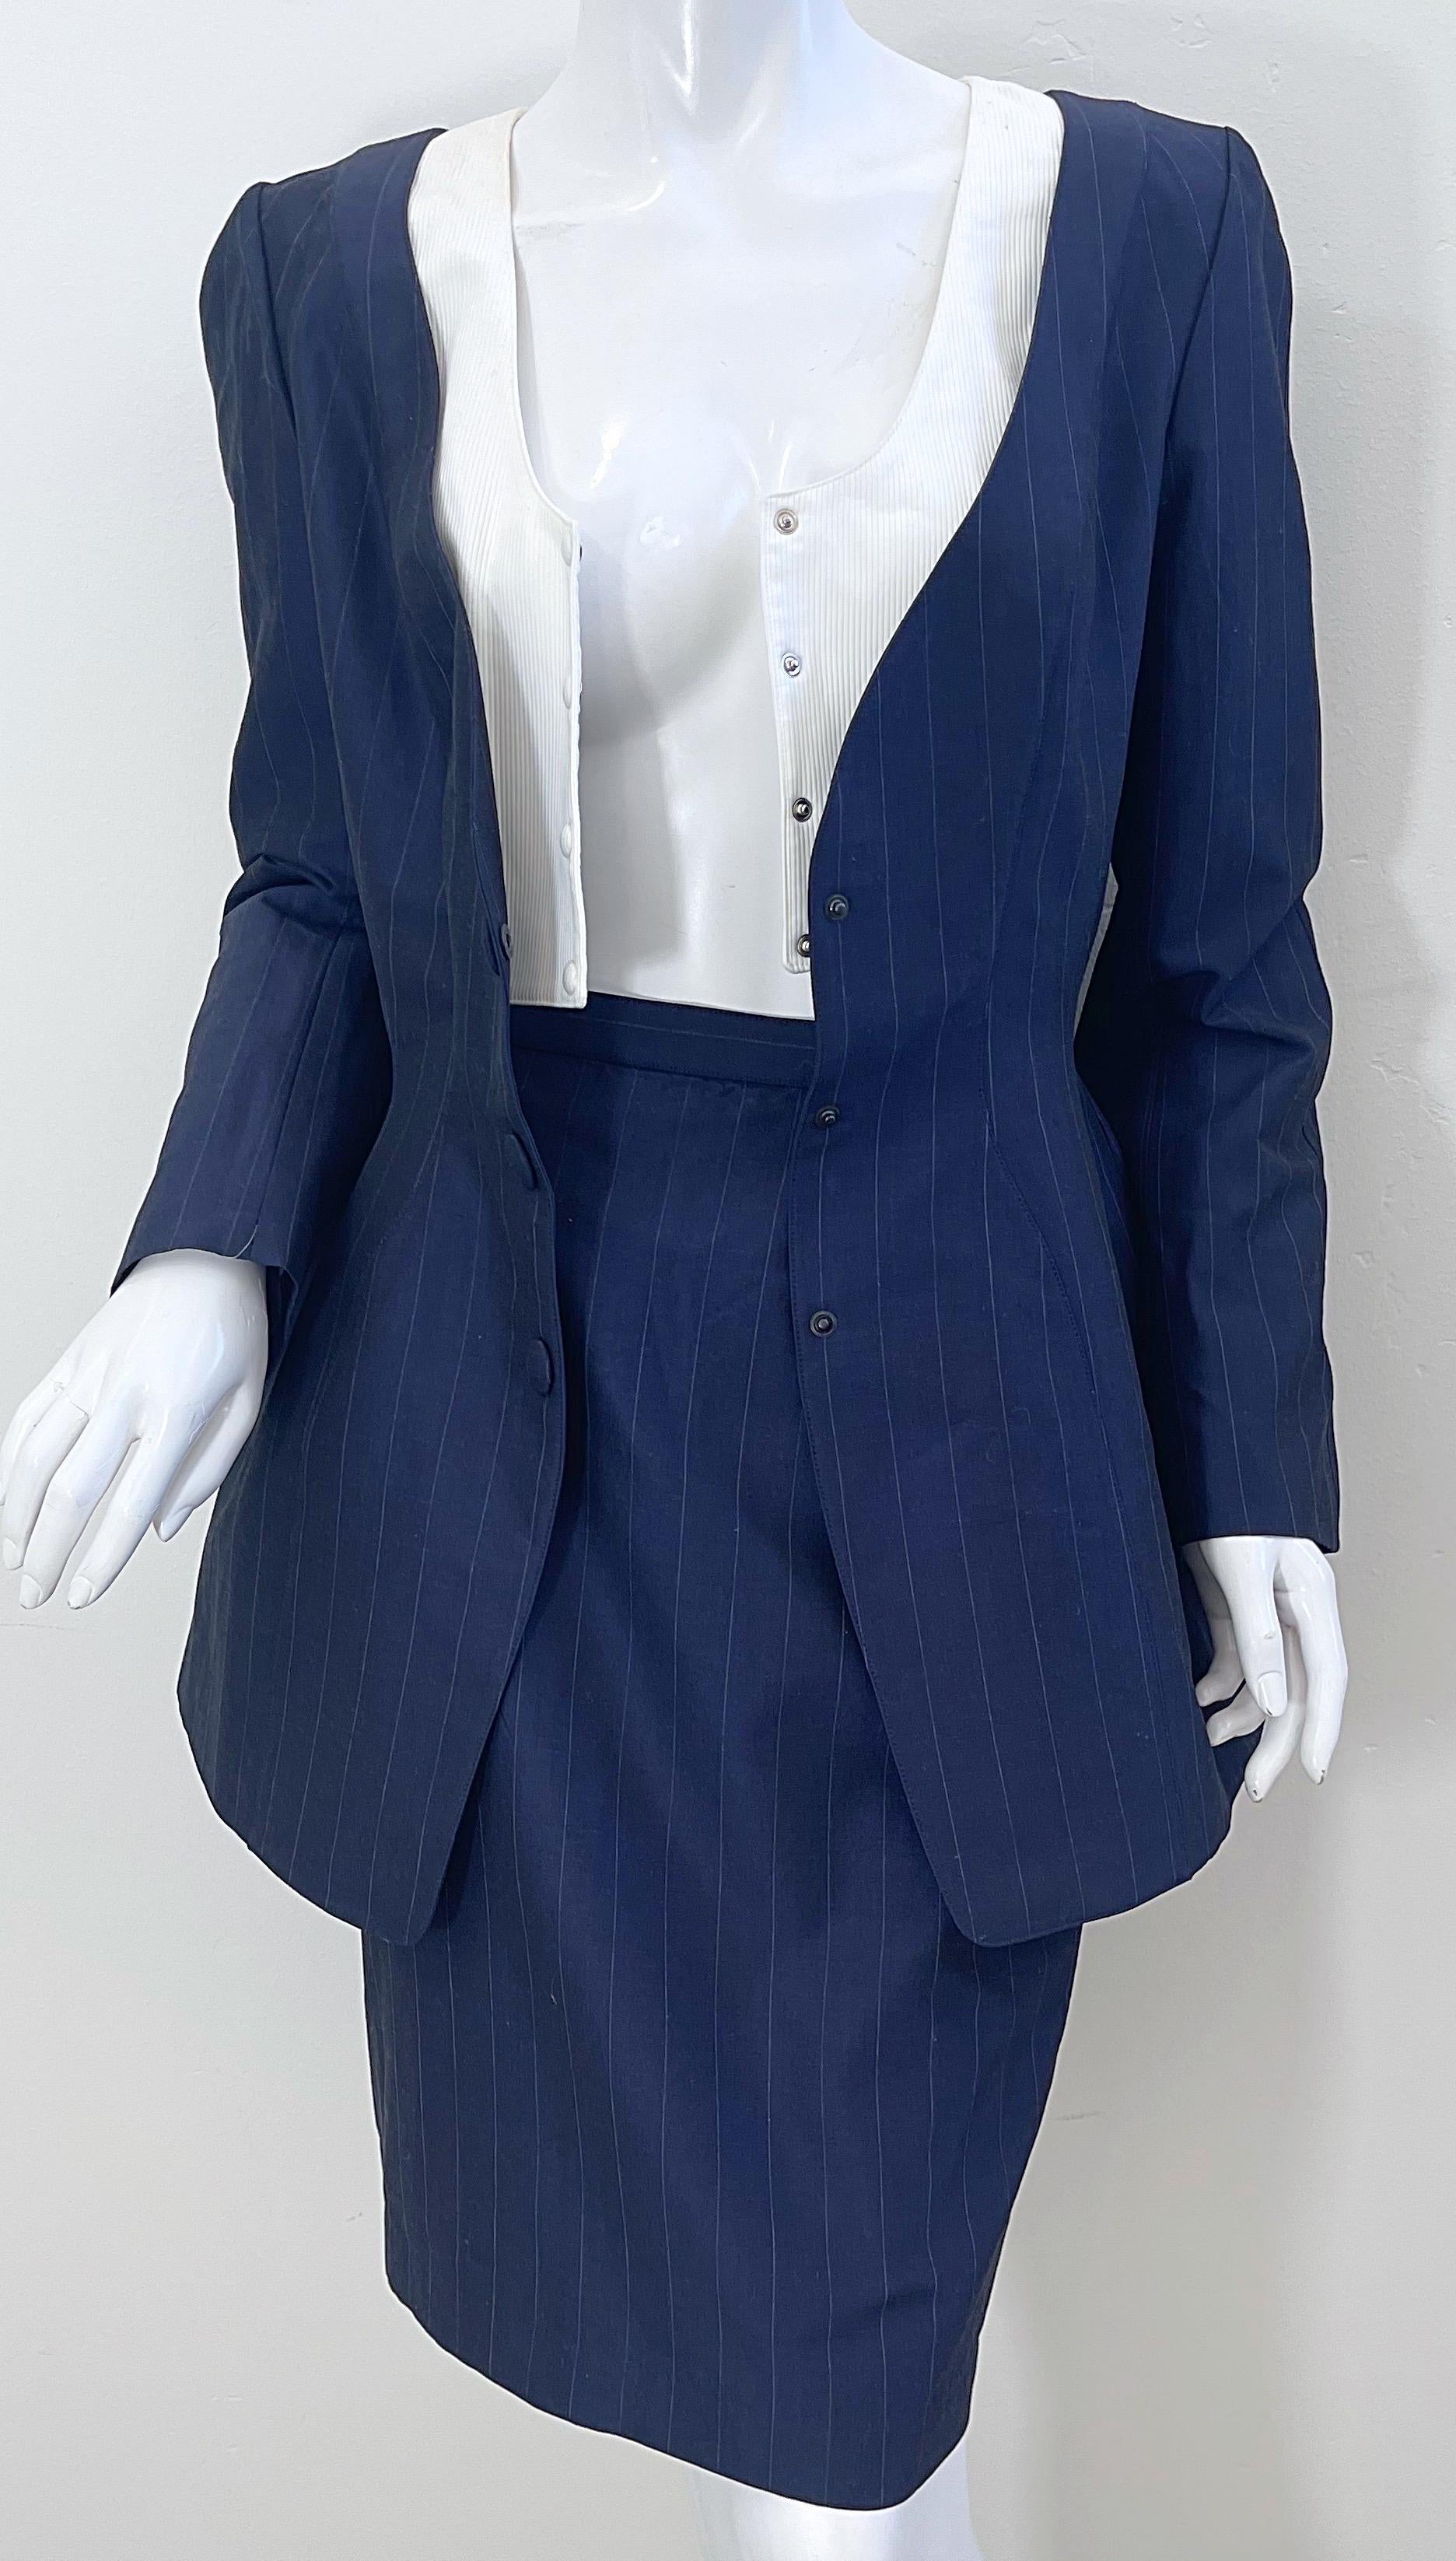 NWT 1990s Thierry Mugler Navy Blue Pinstripe Size 4 Vintage 90s Skirt Suit In New Condition For Sale In San Diego, CA